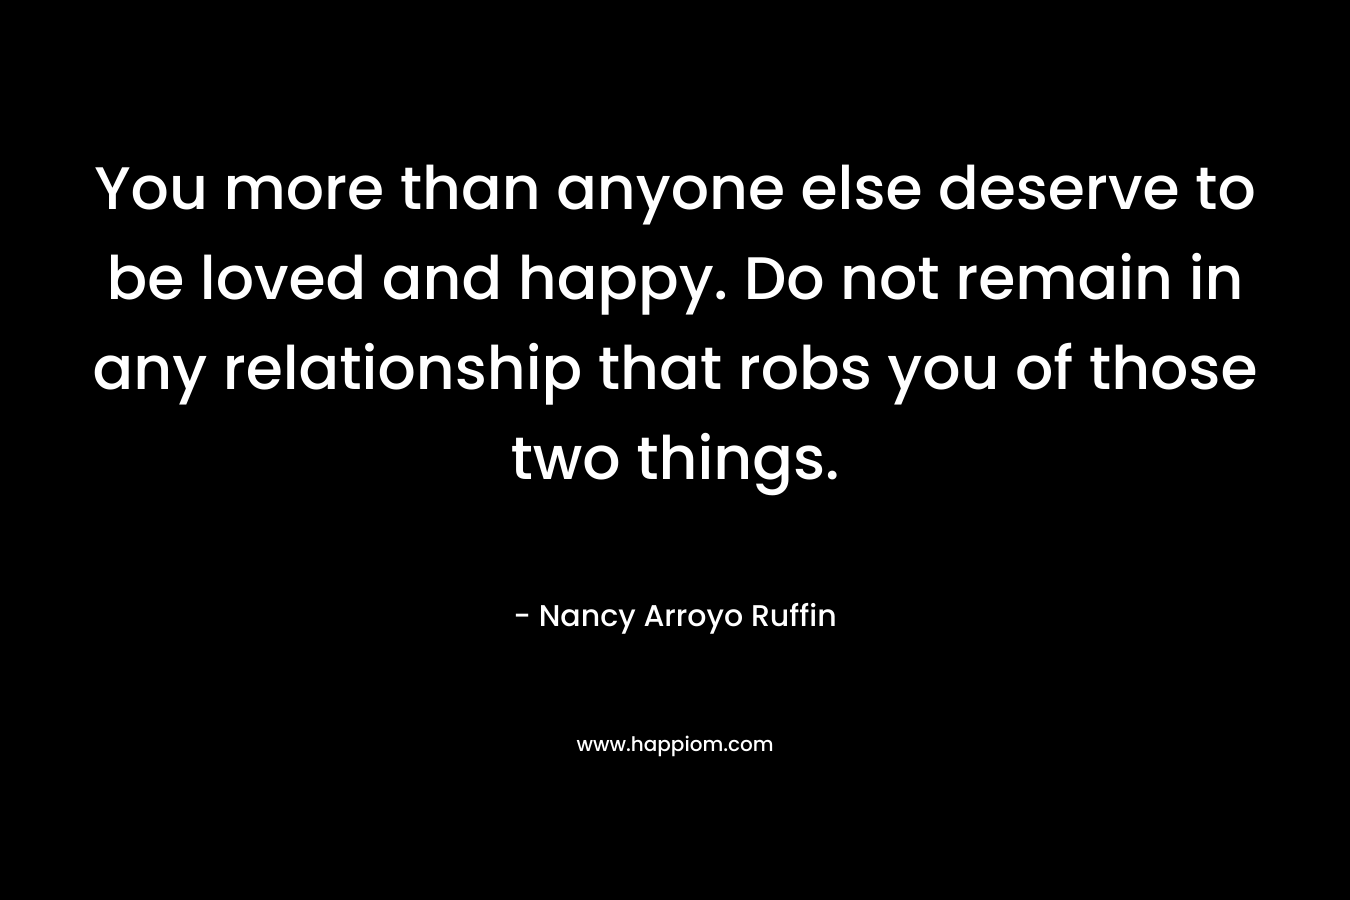 You more than anyone else deserve to be loved and happy. Do not remain in any relationship that robs you of those two things.